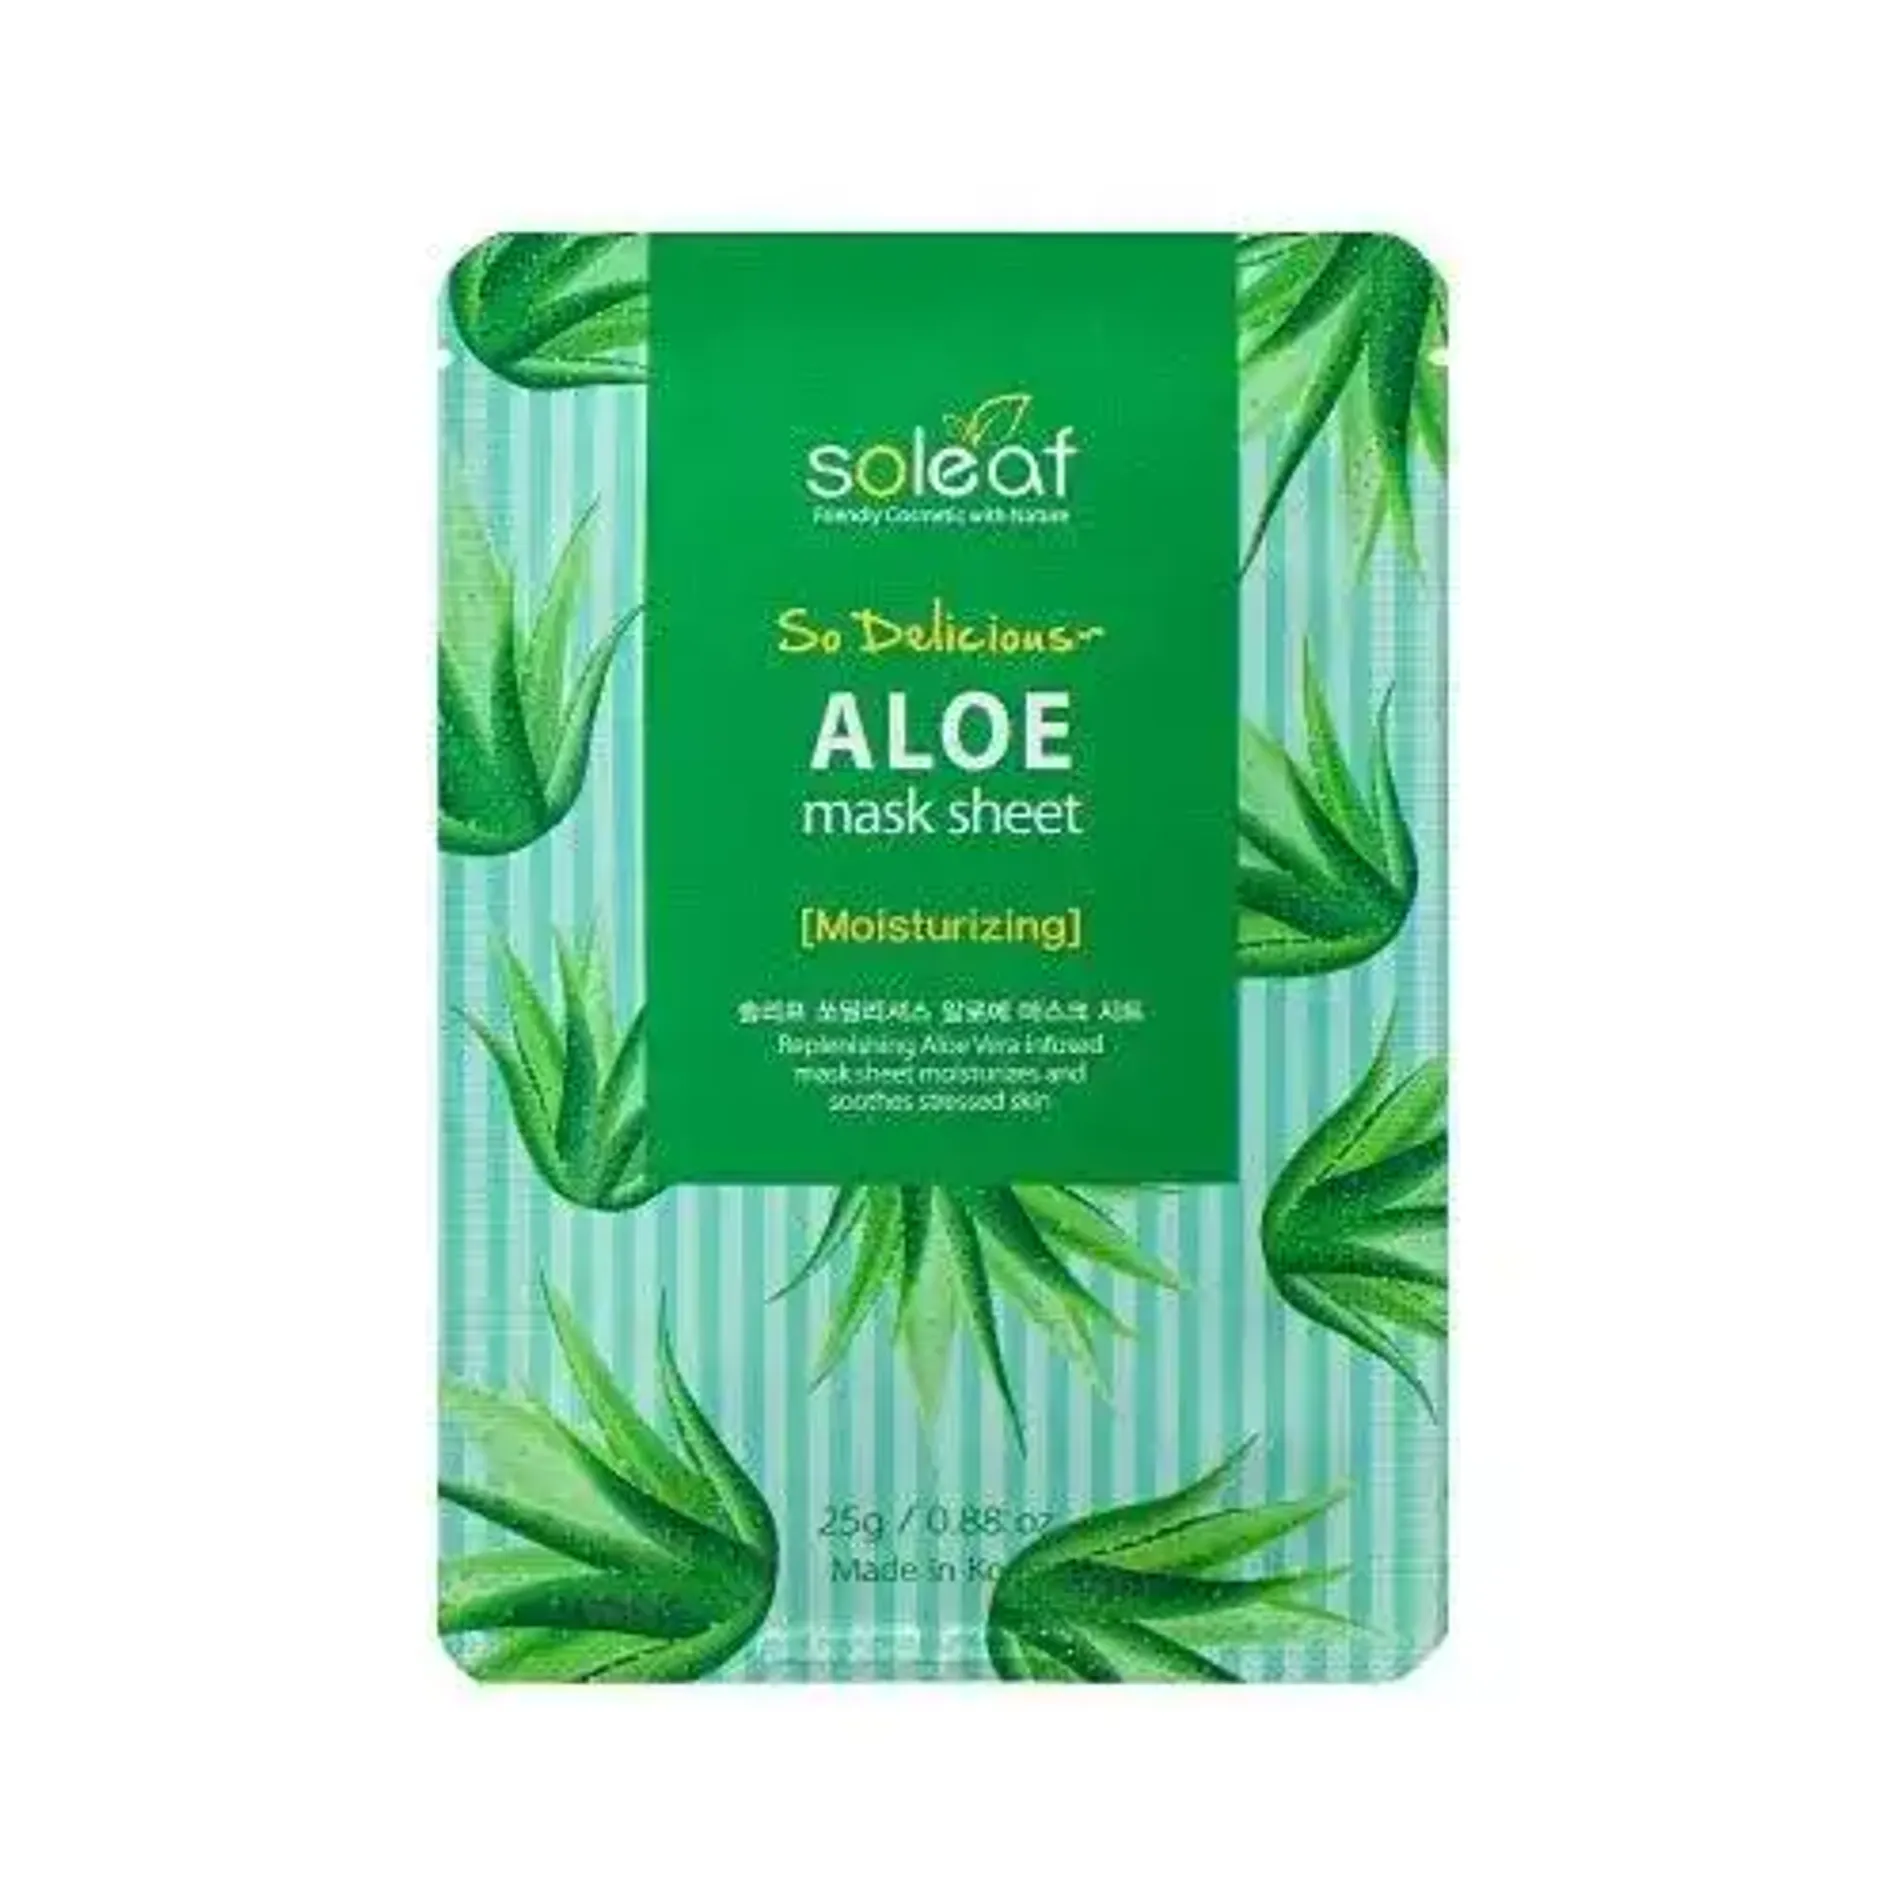 mat-na-giay-soleaf-so-delicious-aloe-mask-sheet-1